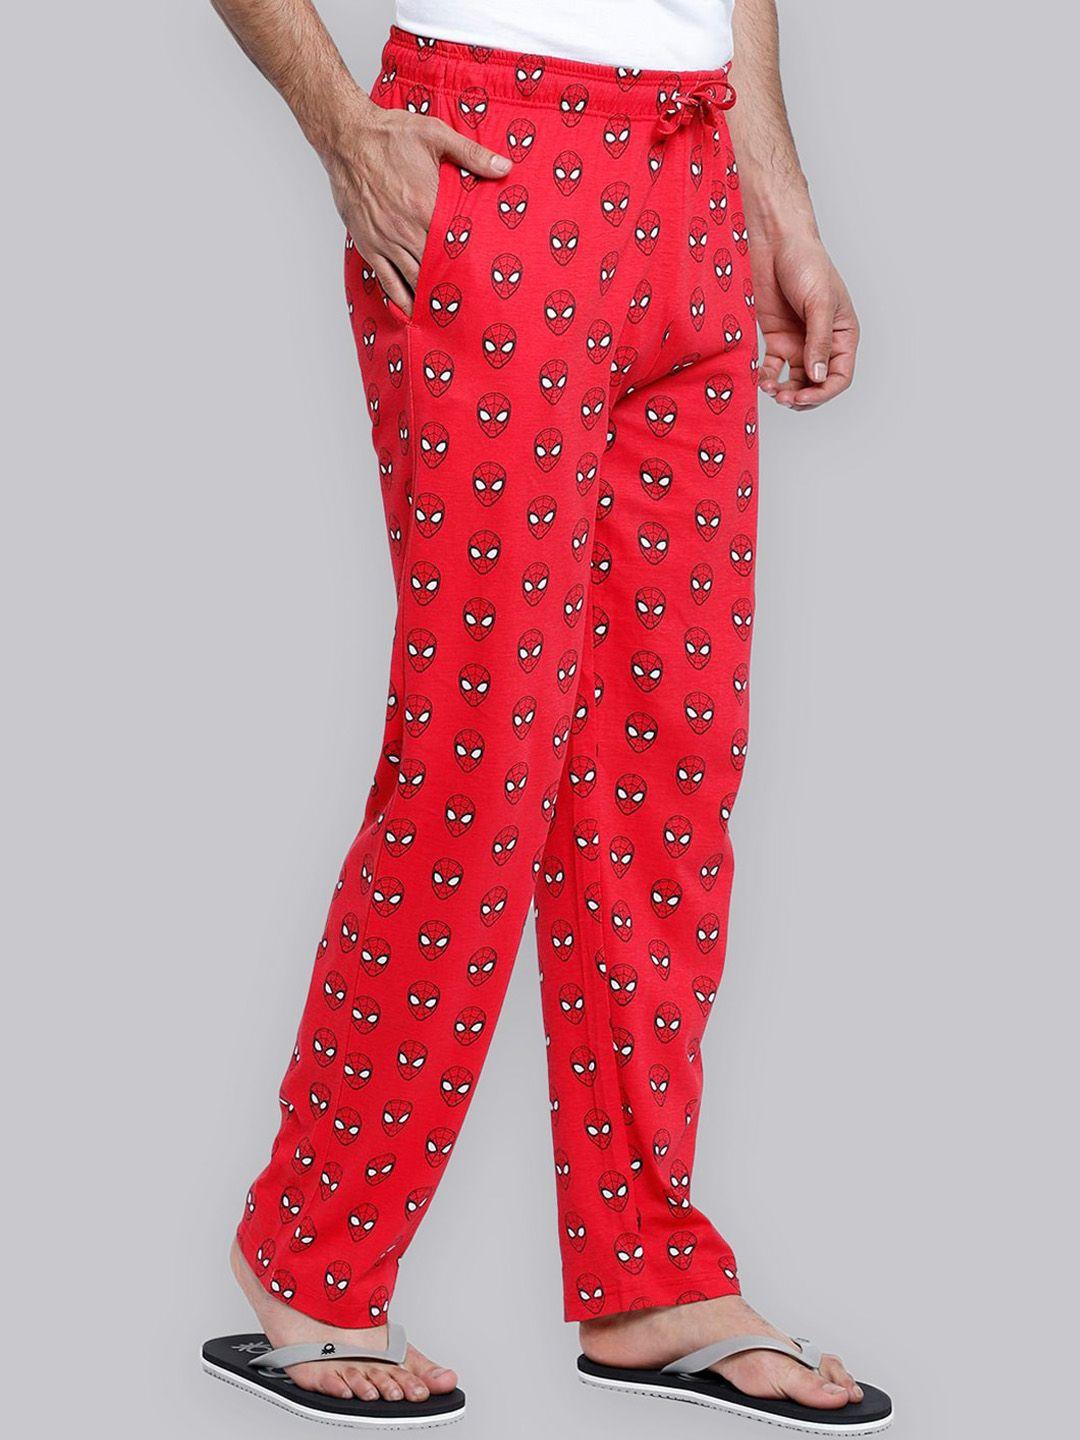 free authority men red spiderman printed cotton lounge pants